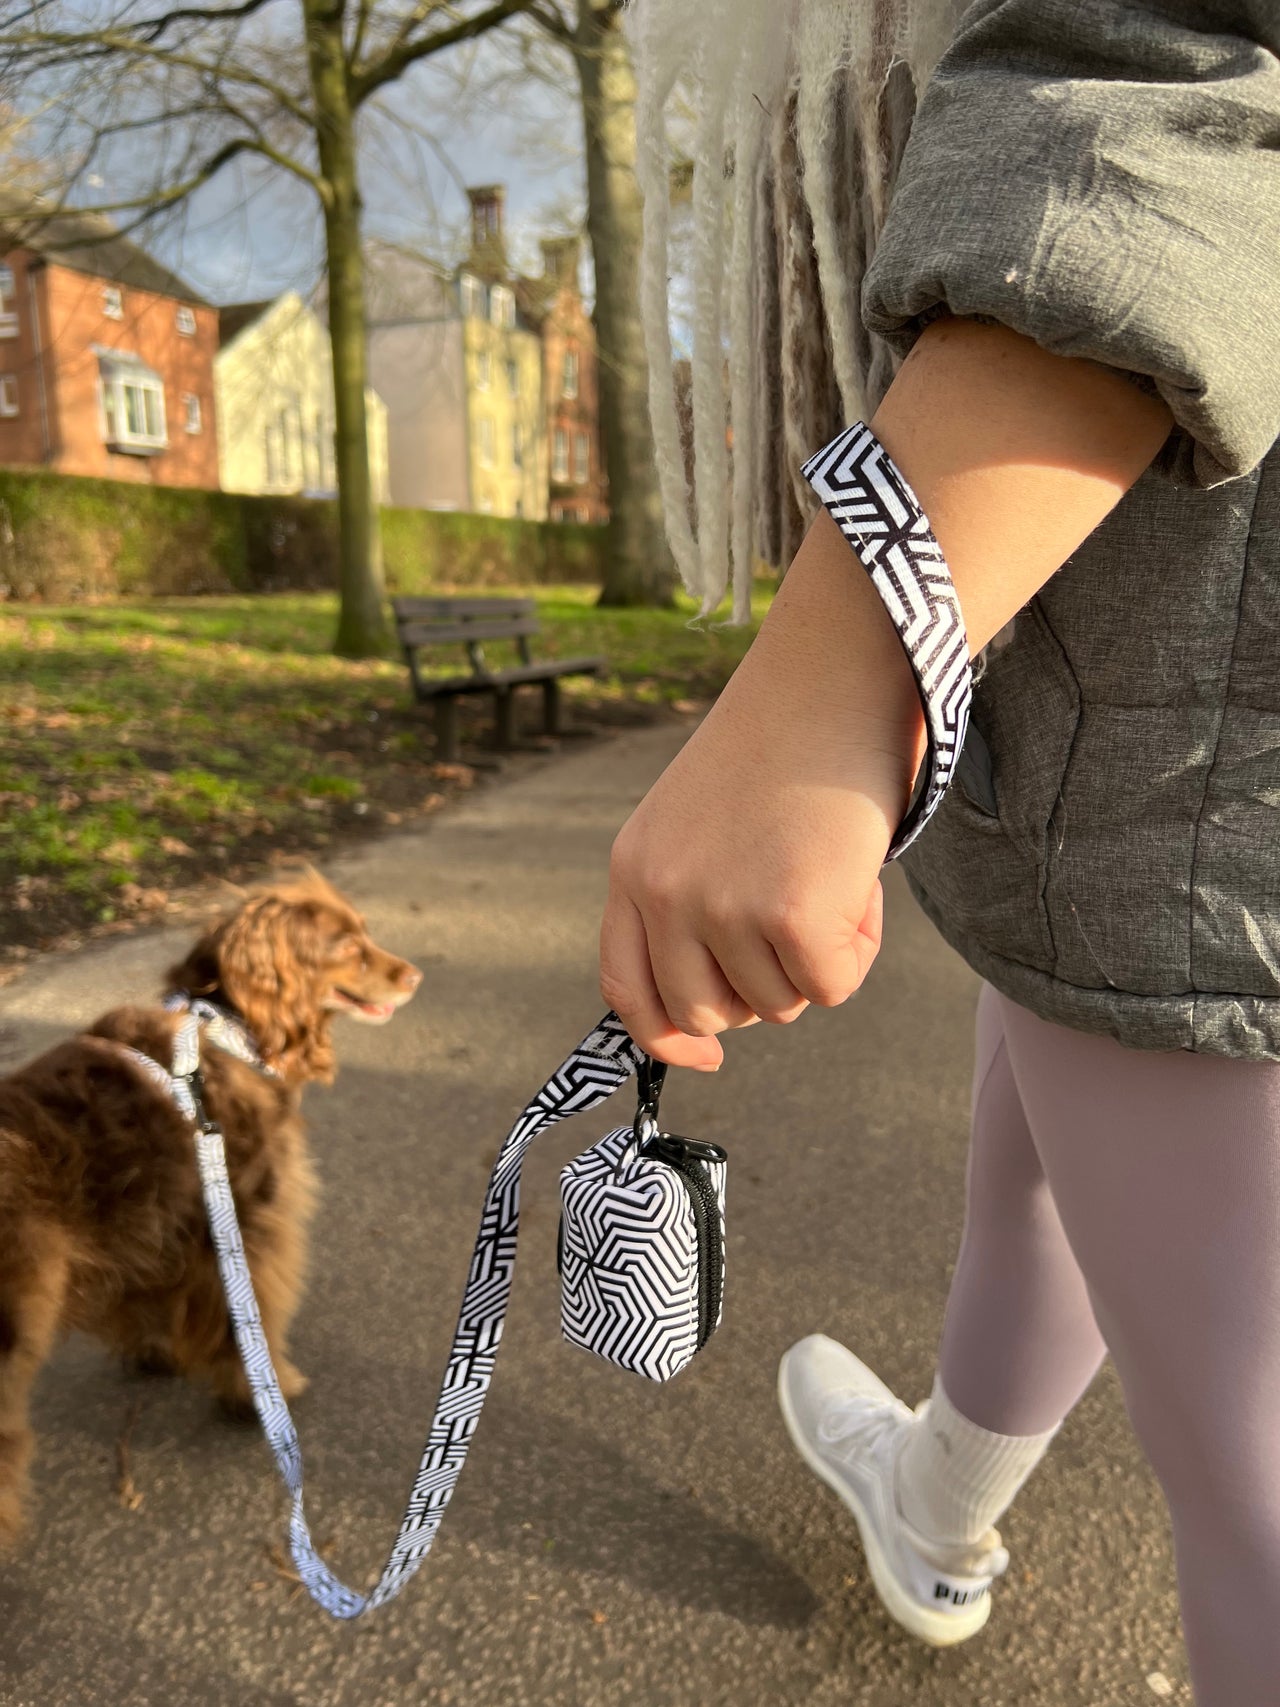 A stylish dog and owner strutting their stuff in the park with a TopDog just an illusion matching collar harness and walking bag set